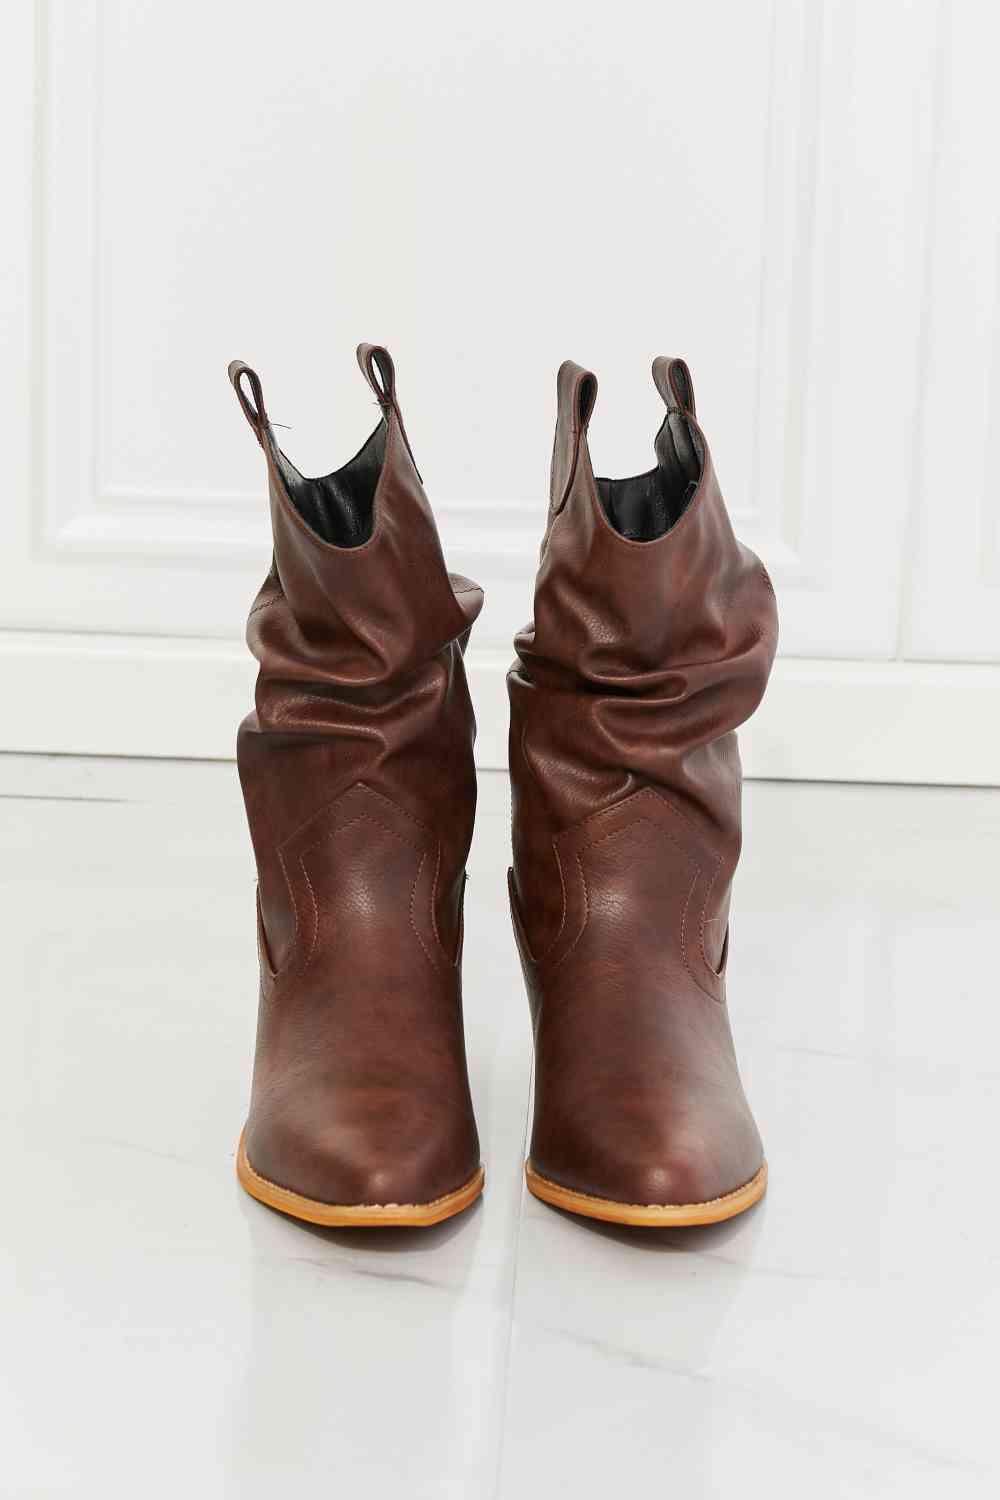 MMShoes Better in Texas Scrunch Cowboy Boots in Brown - Happily Ever Atchison Shop Co.